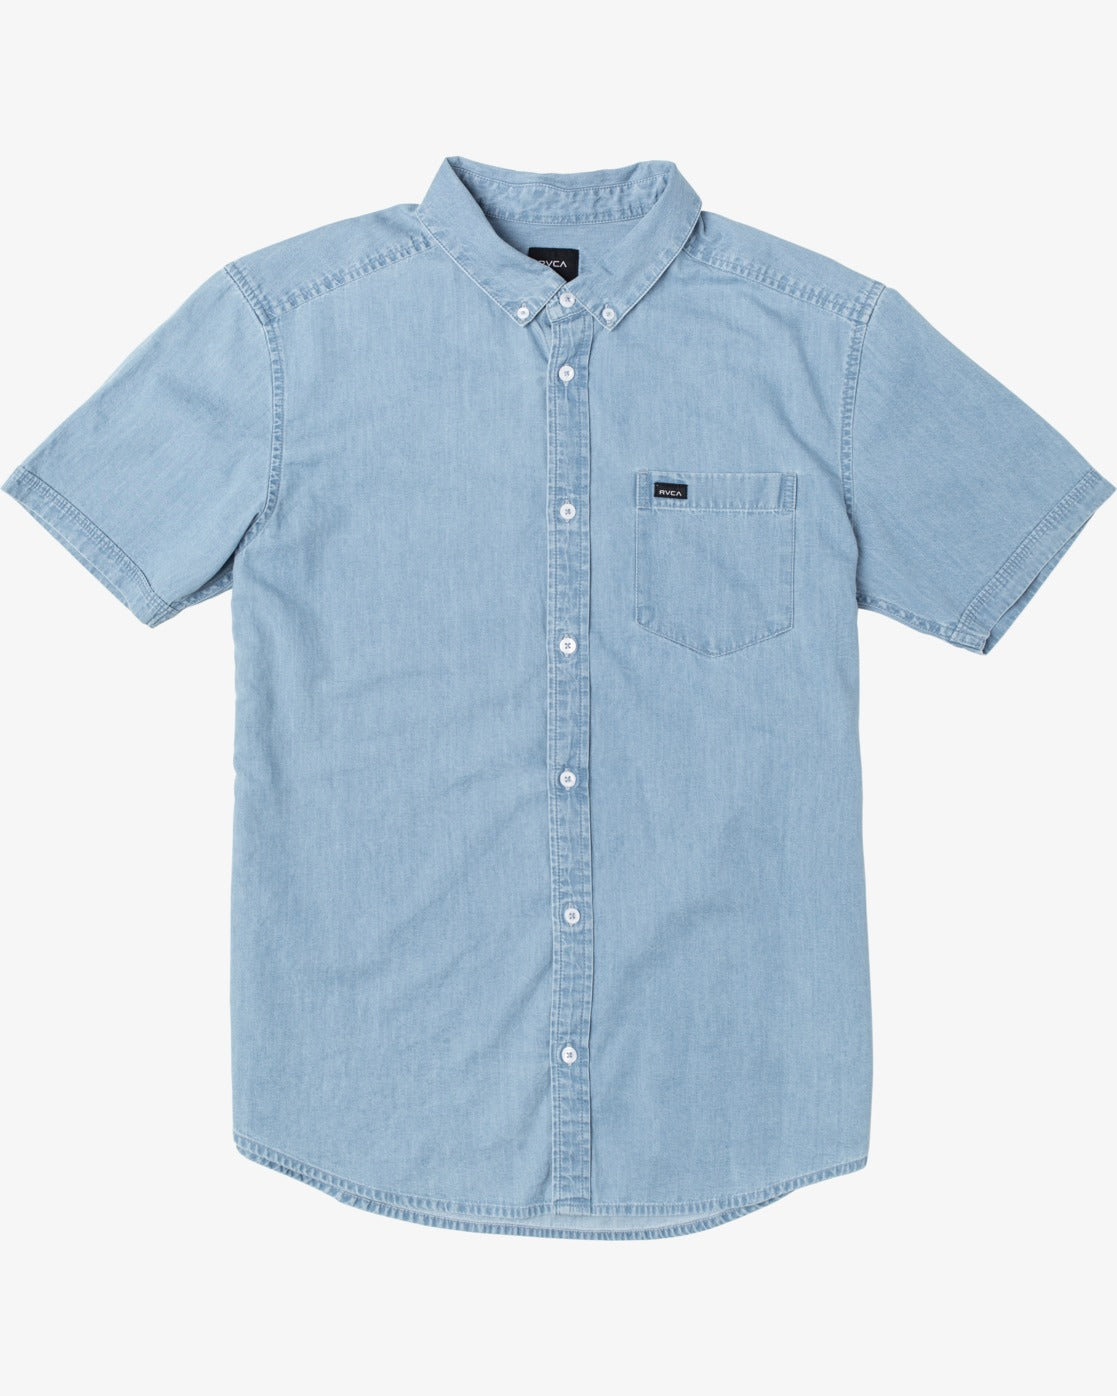 RVCA - Hastings Denim Short Sleeve Button Up